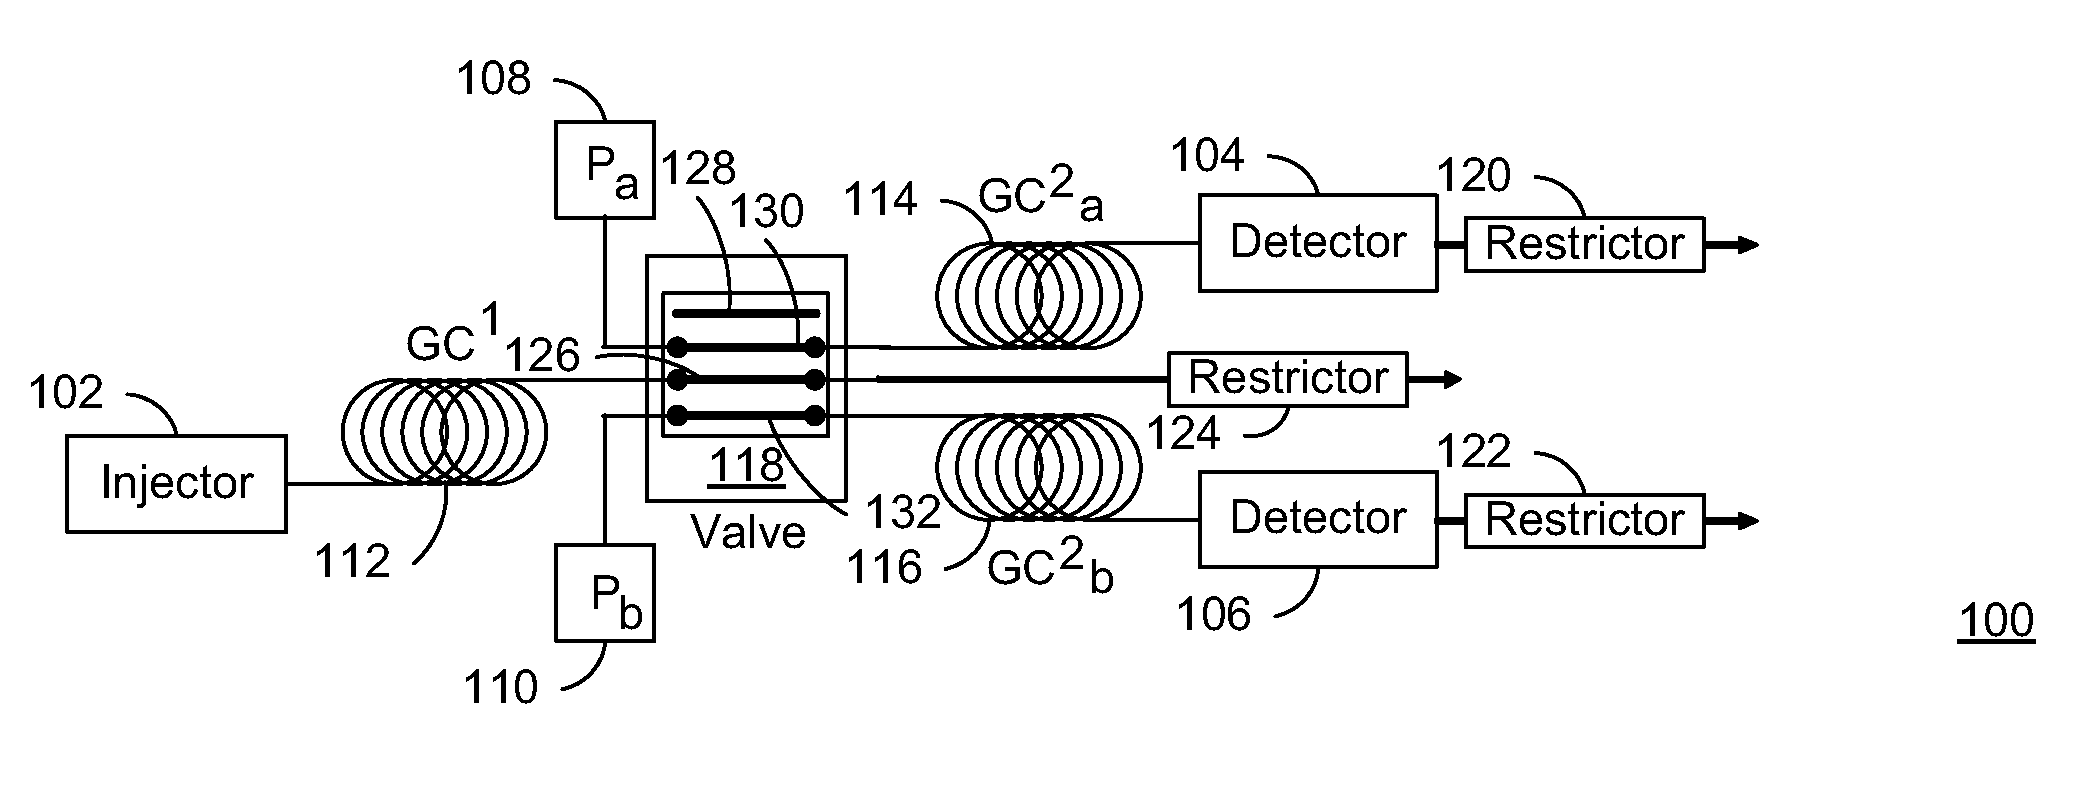 Apparatus and method for multi-dimensional gas chromatography